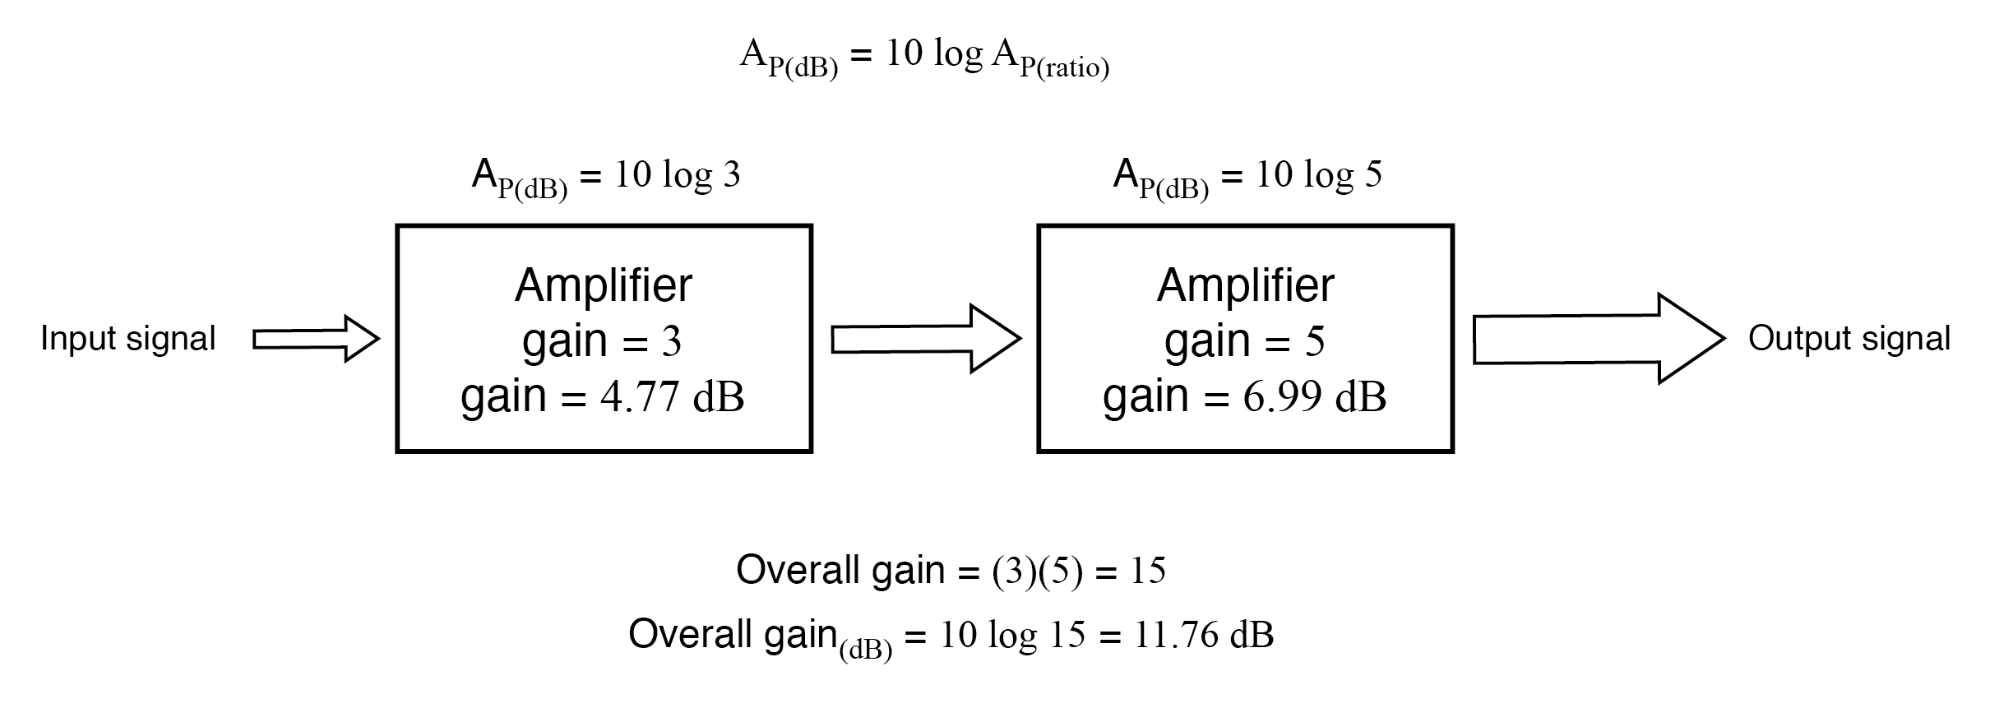 Gain of amplifier stages in decibels is additive: 4.77 dB + 6.99 dB = 11.76 dB.